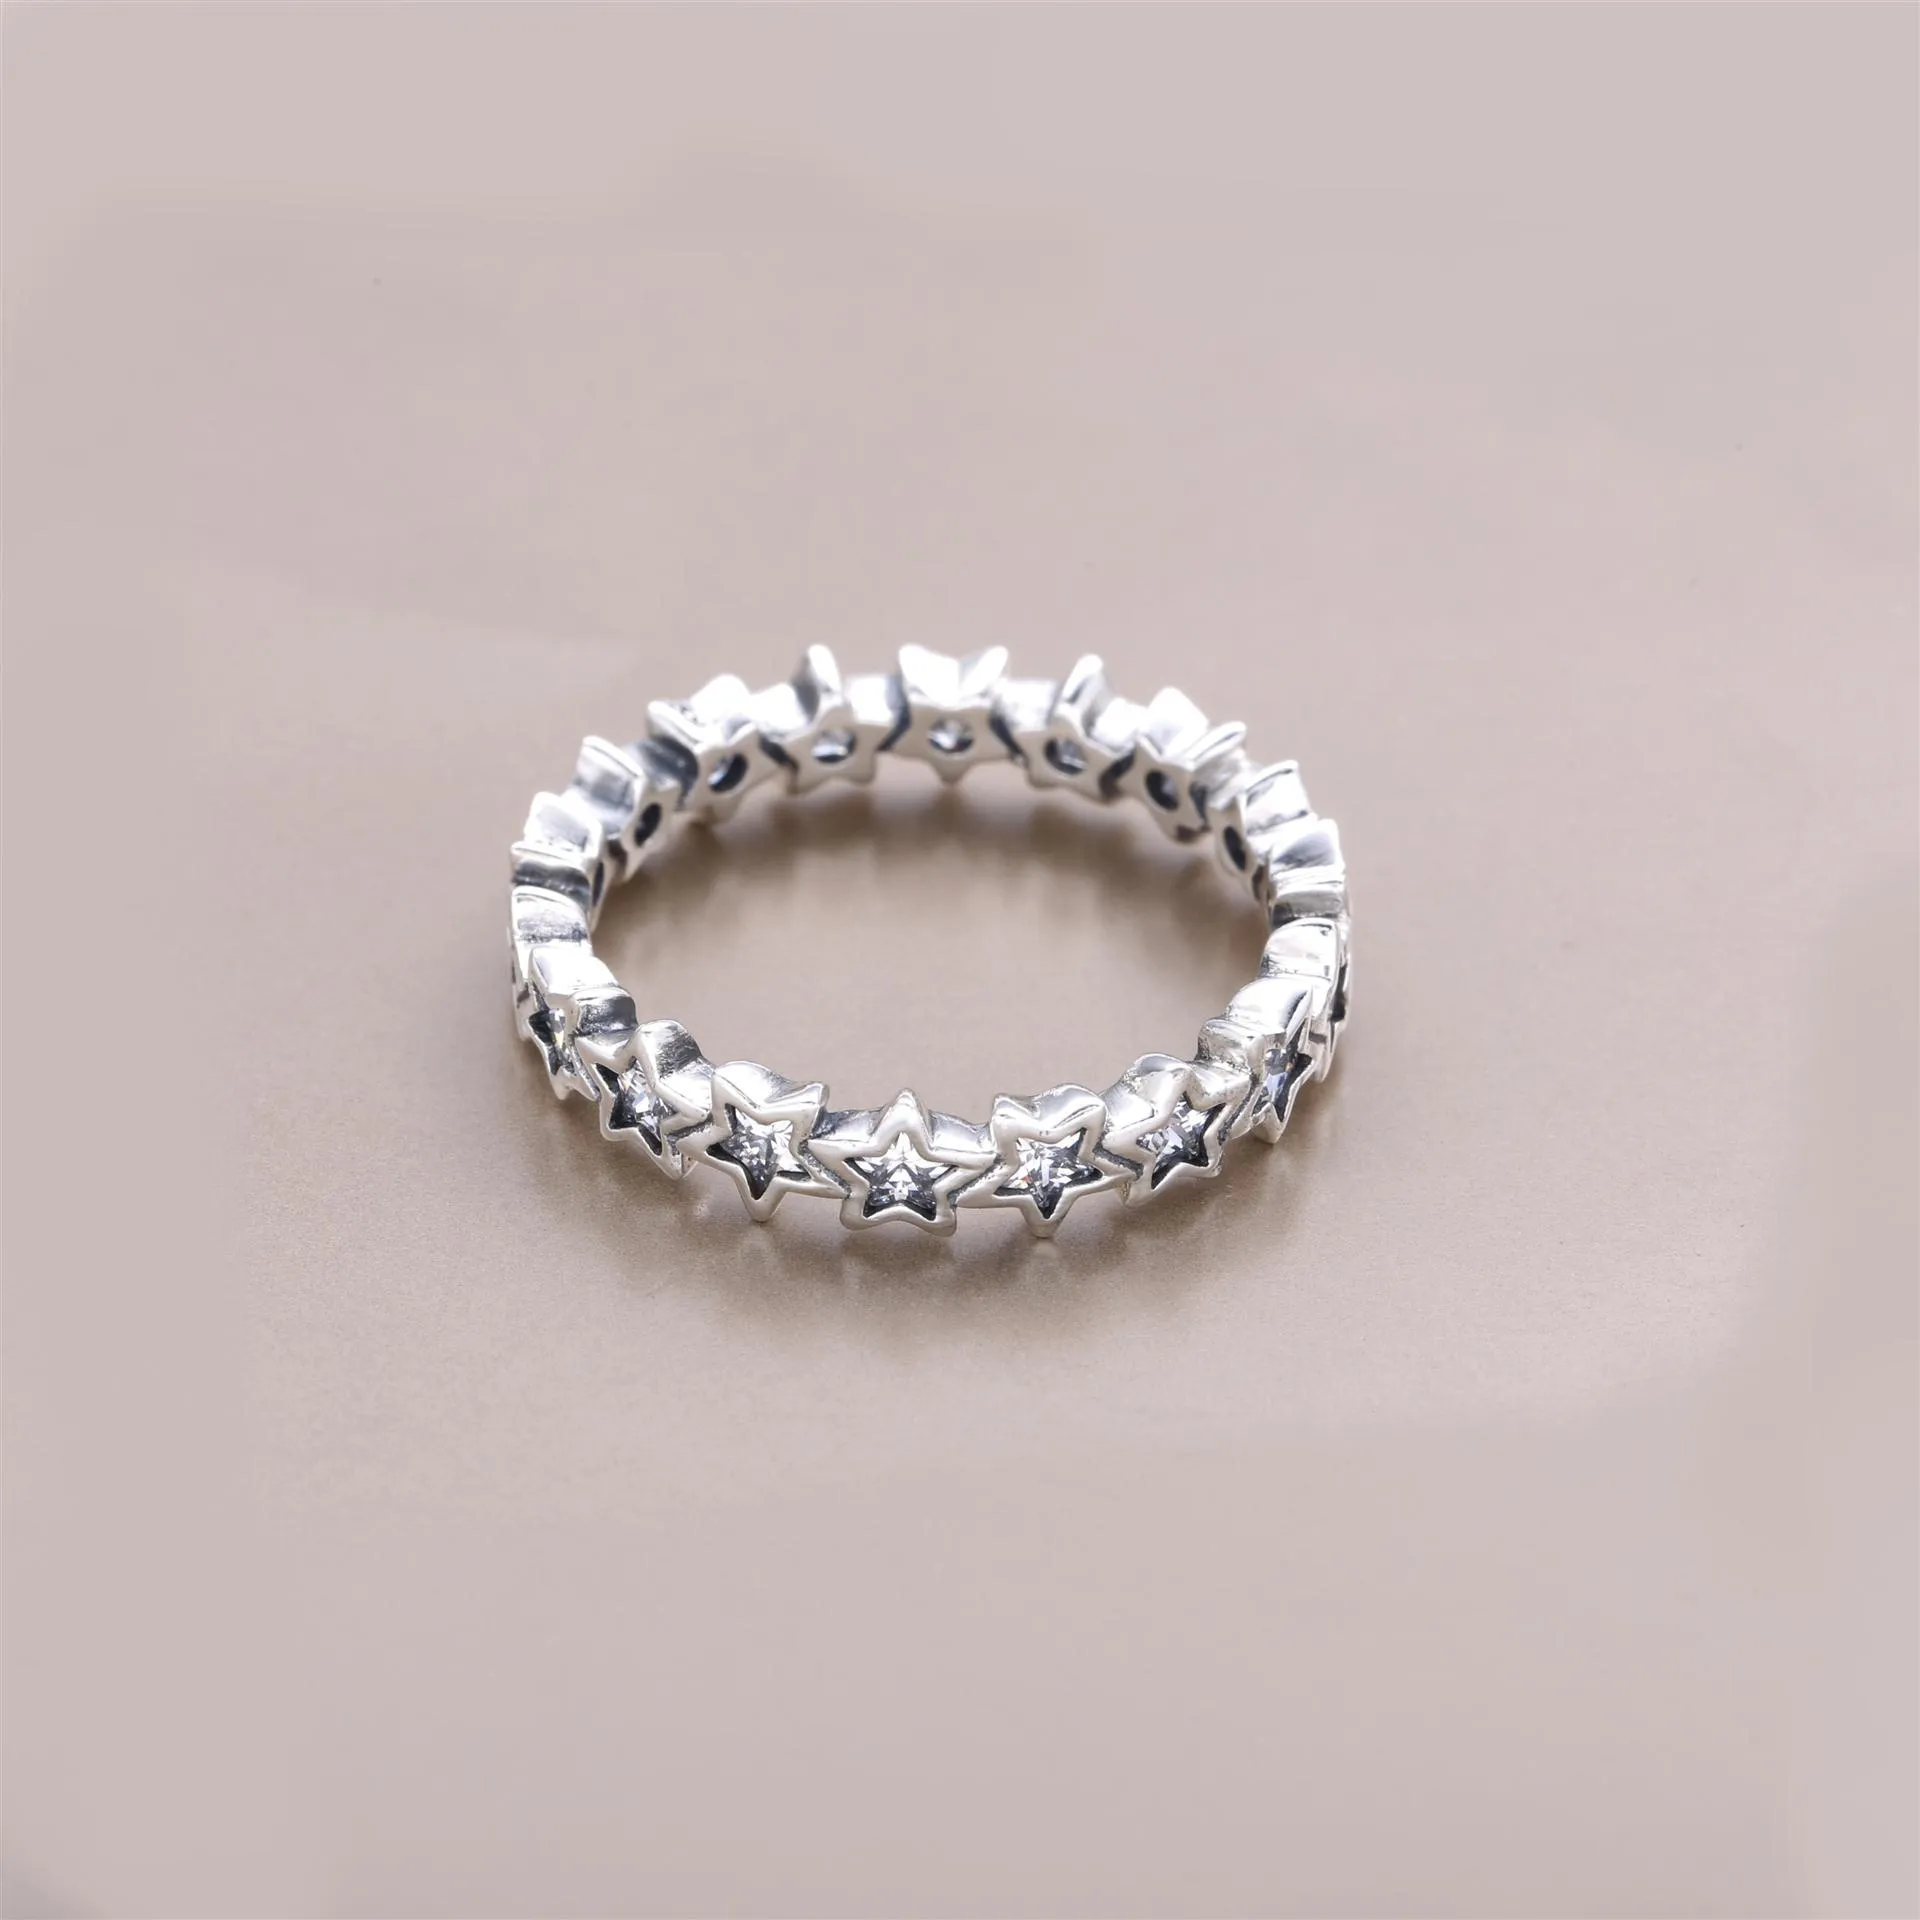 Star silver ring with clear cubic zirconia - 190974CZ - Inele PA